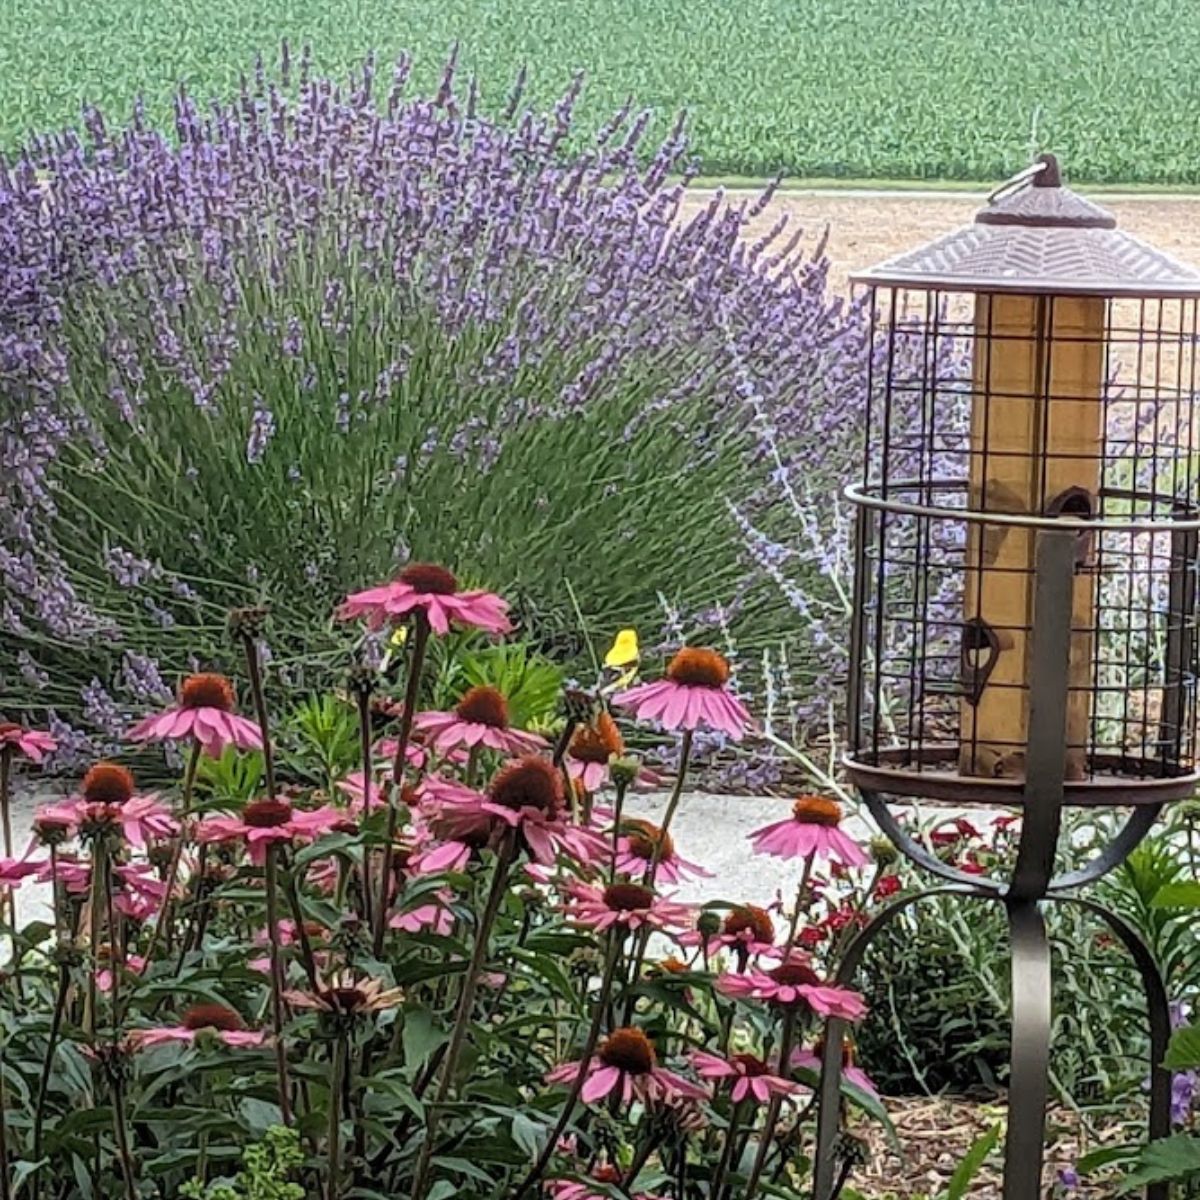 a beautiful corner of my yard displaying a huge lavender plant, a bird feeder and a gold finch bird sitting atop an echinacea flower.